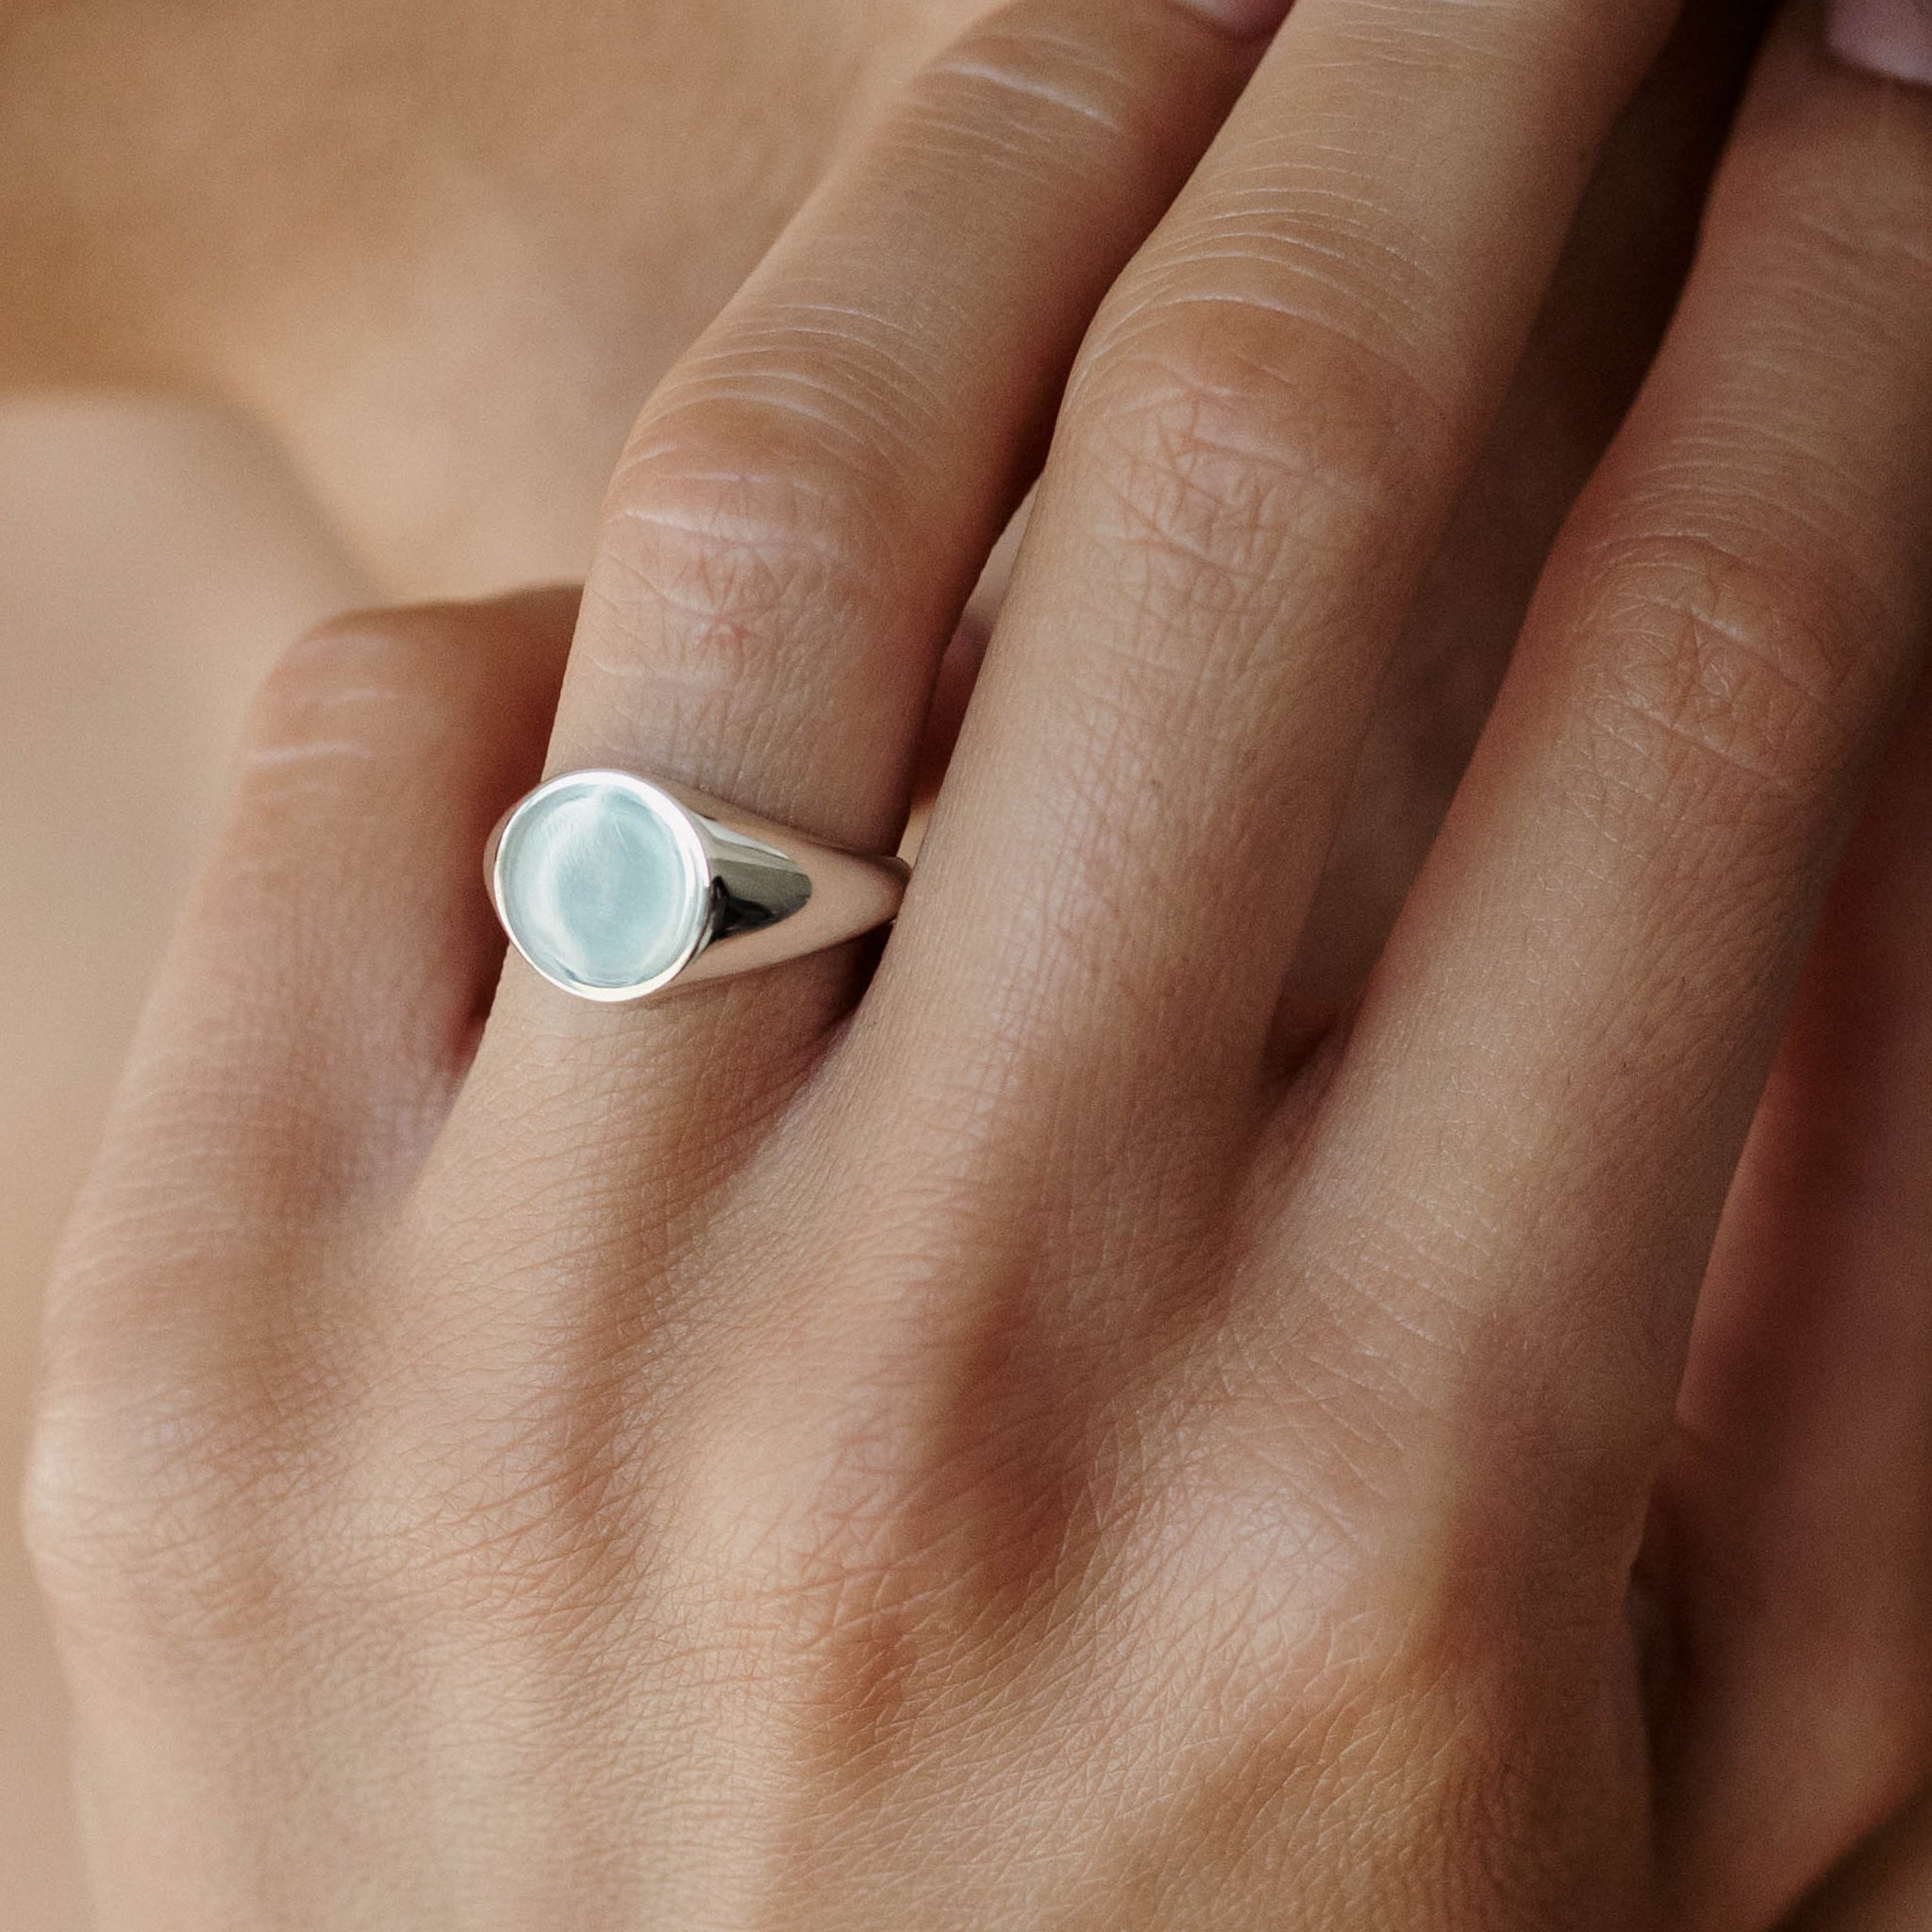 Archive — Round Signet Ring | Silver | Size K 1/2